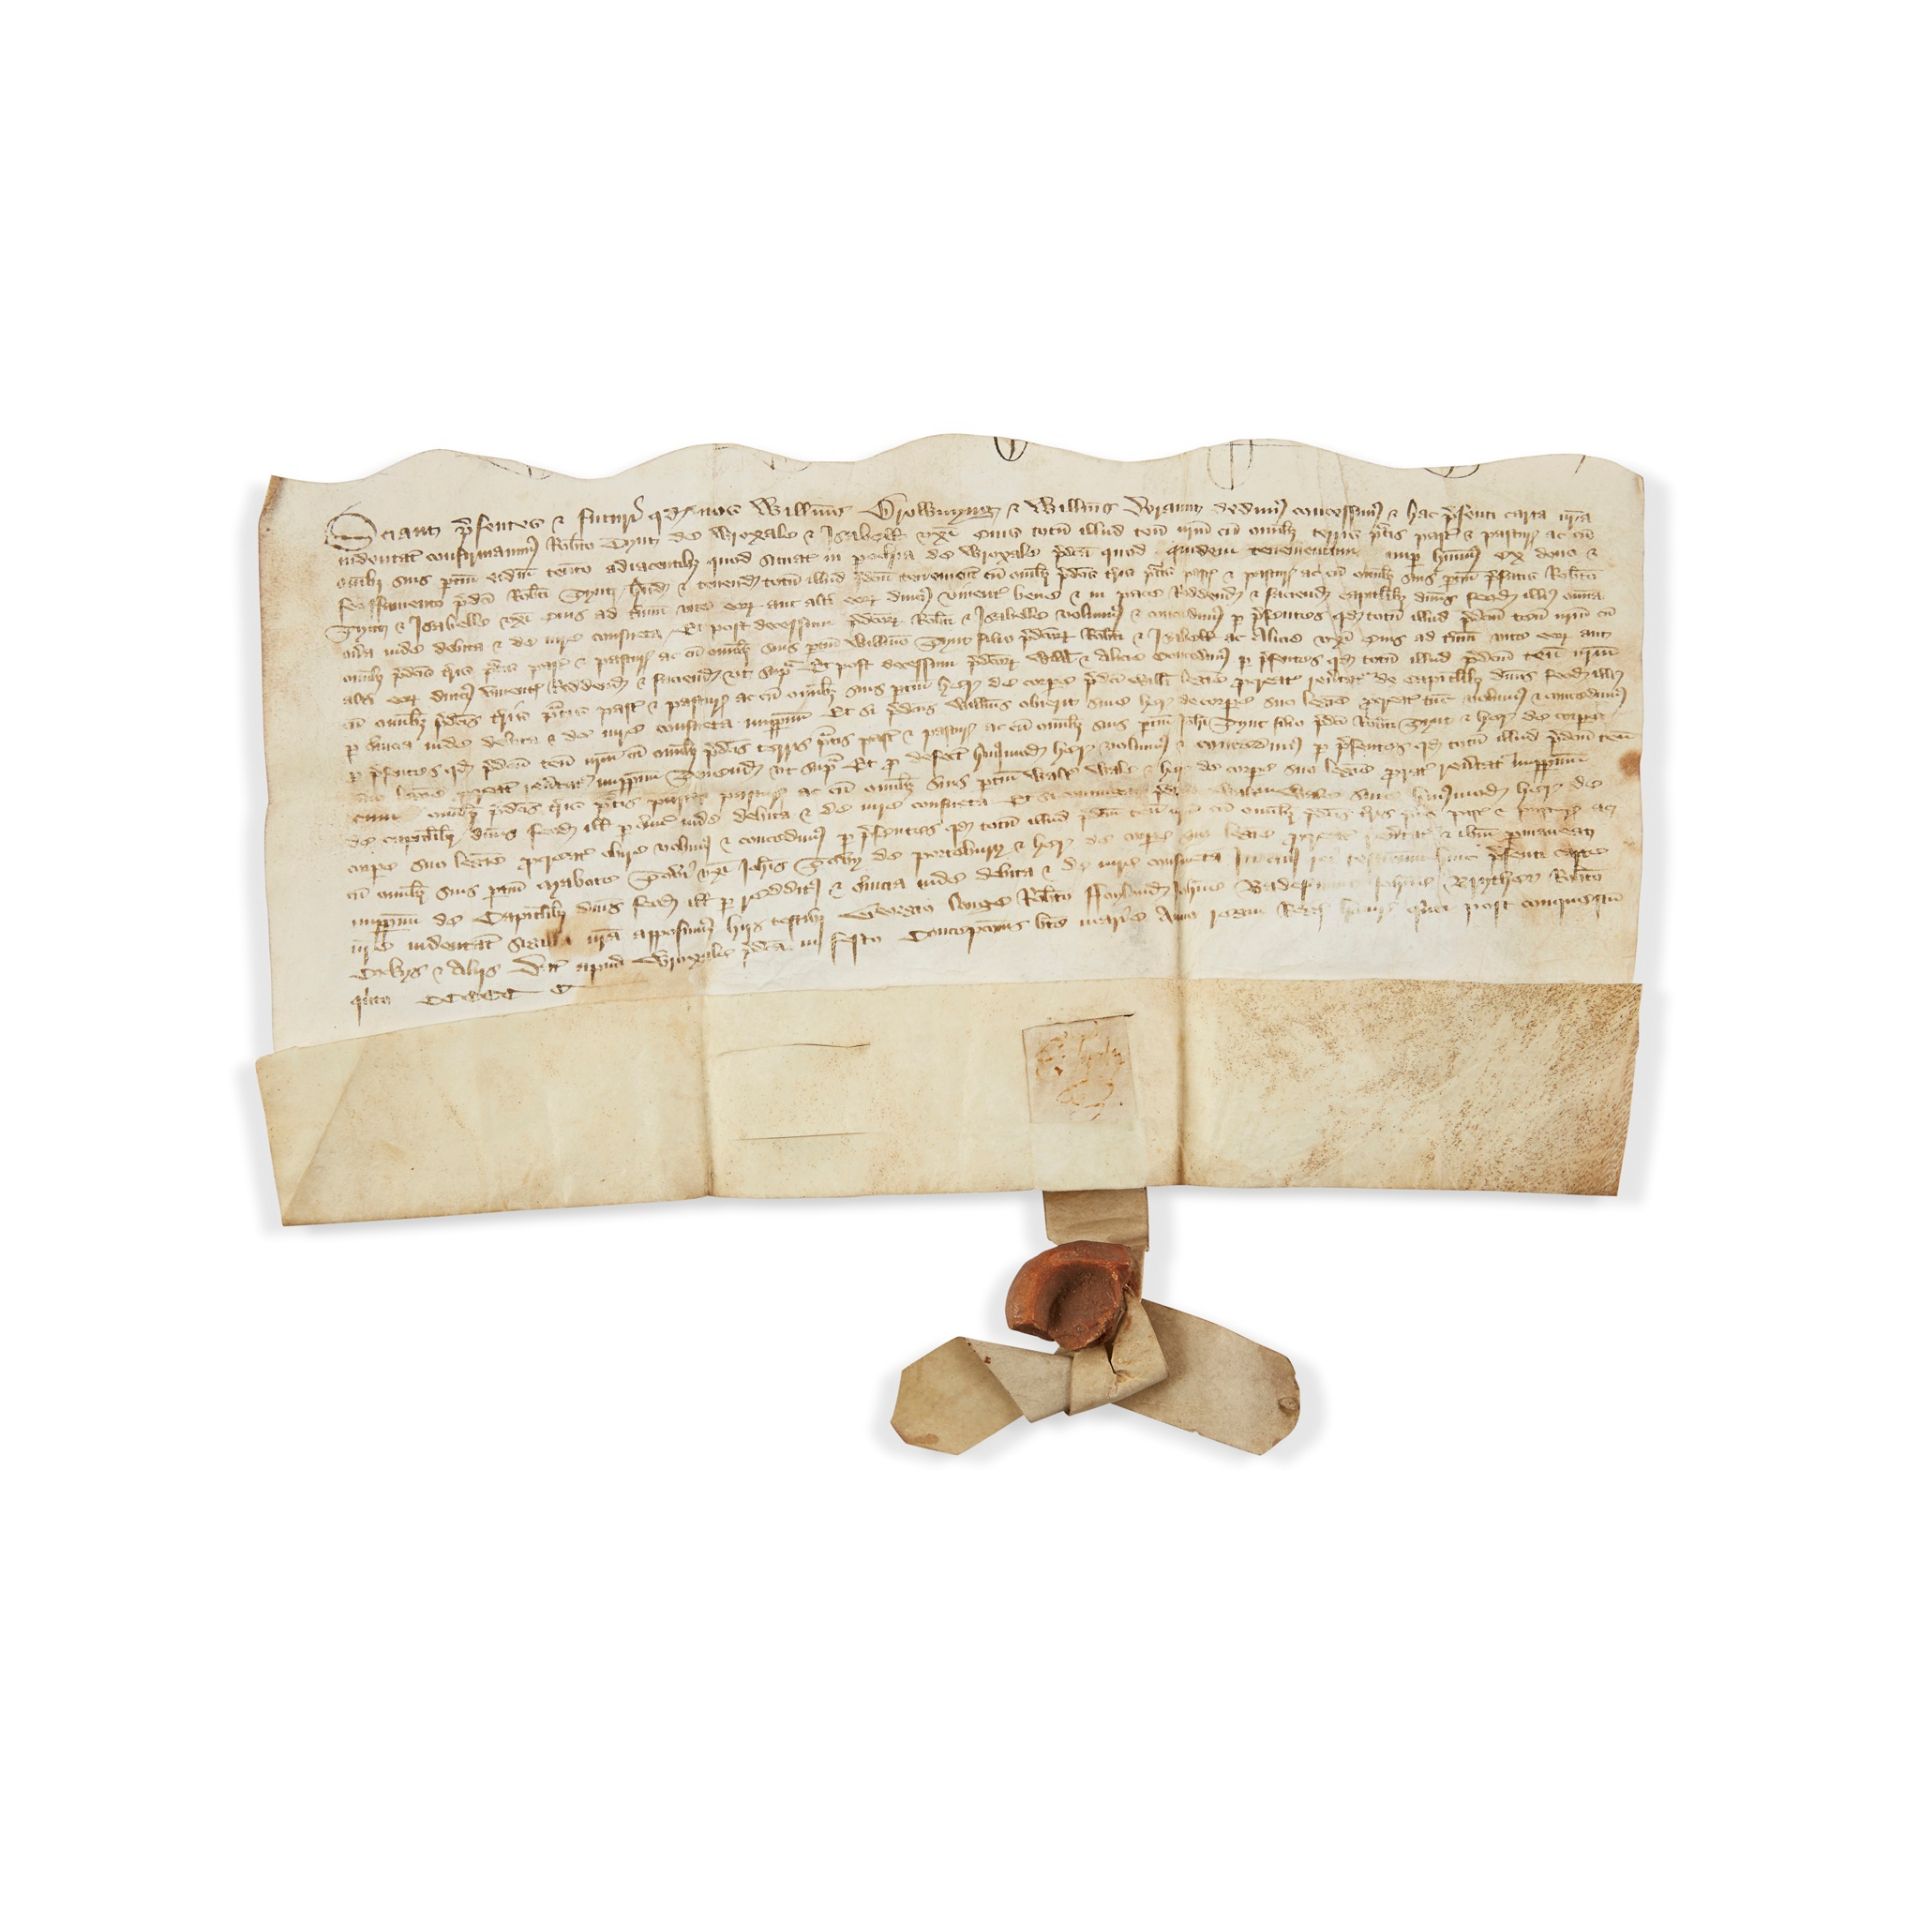 Somerset - Indenture agreement William Drulkinyng, William Porant and Robert Dynt of land in the